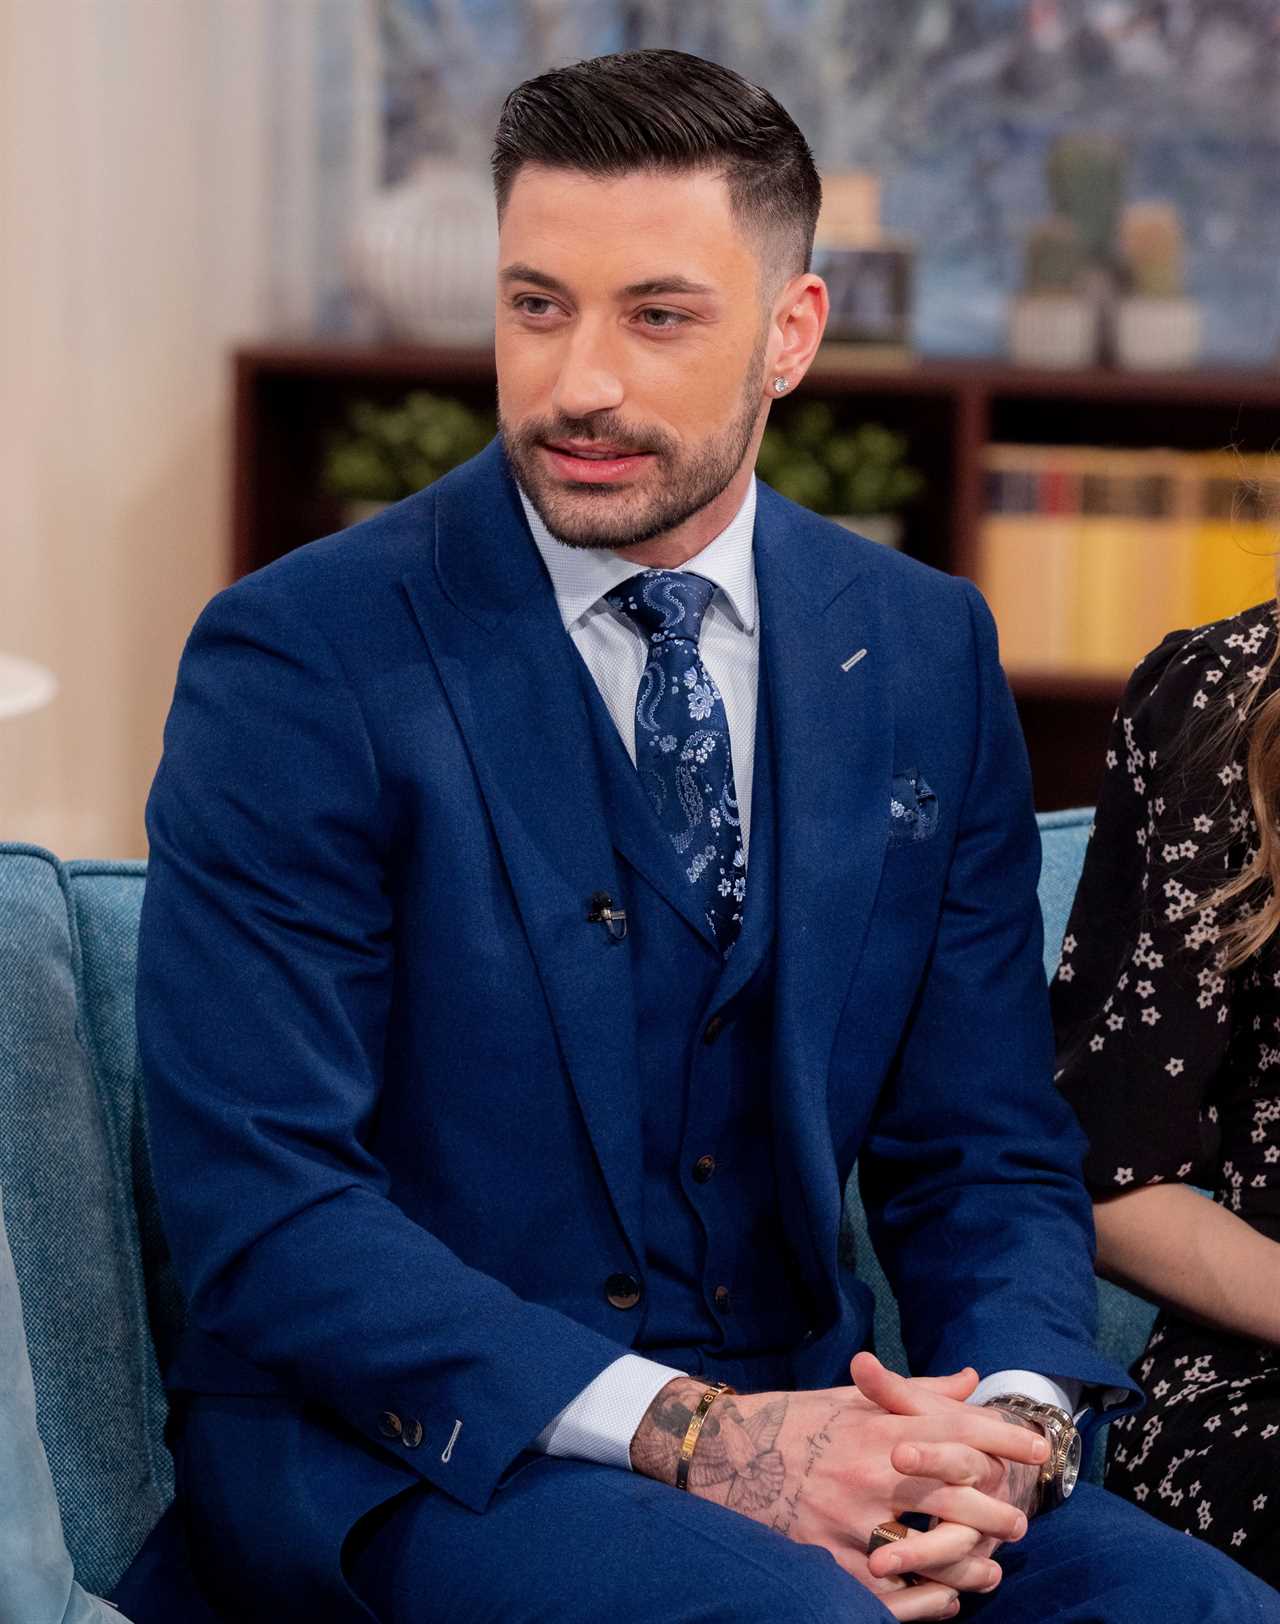 Strictly Star Giovanni Pernice Makes Surprising Career Move